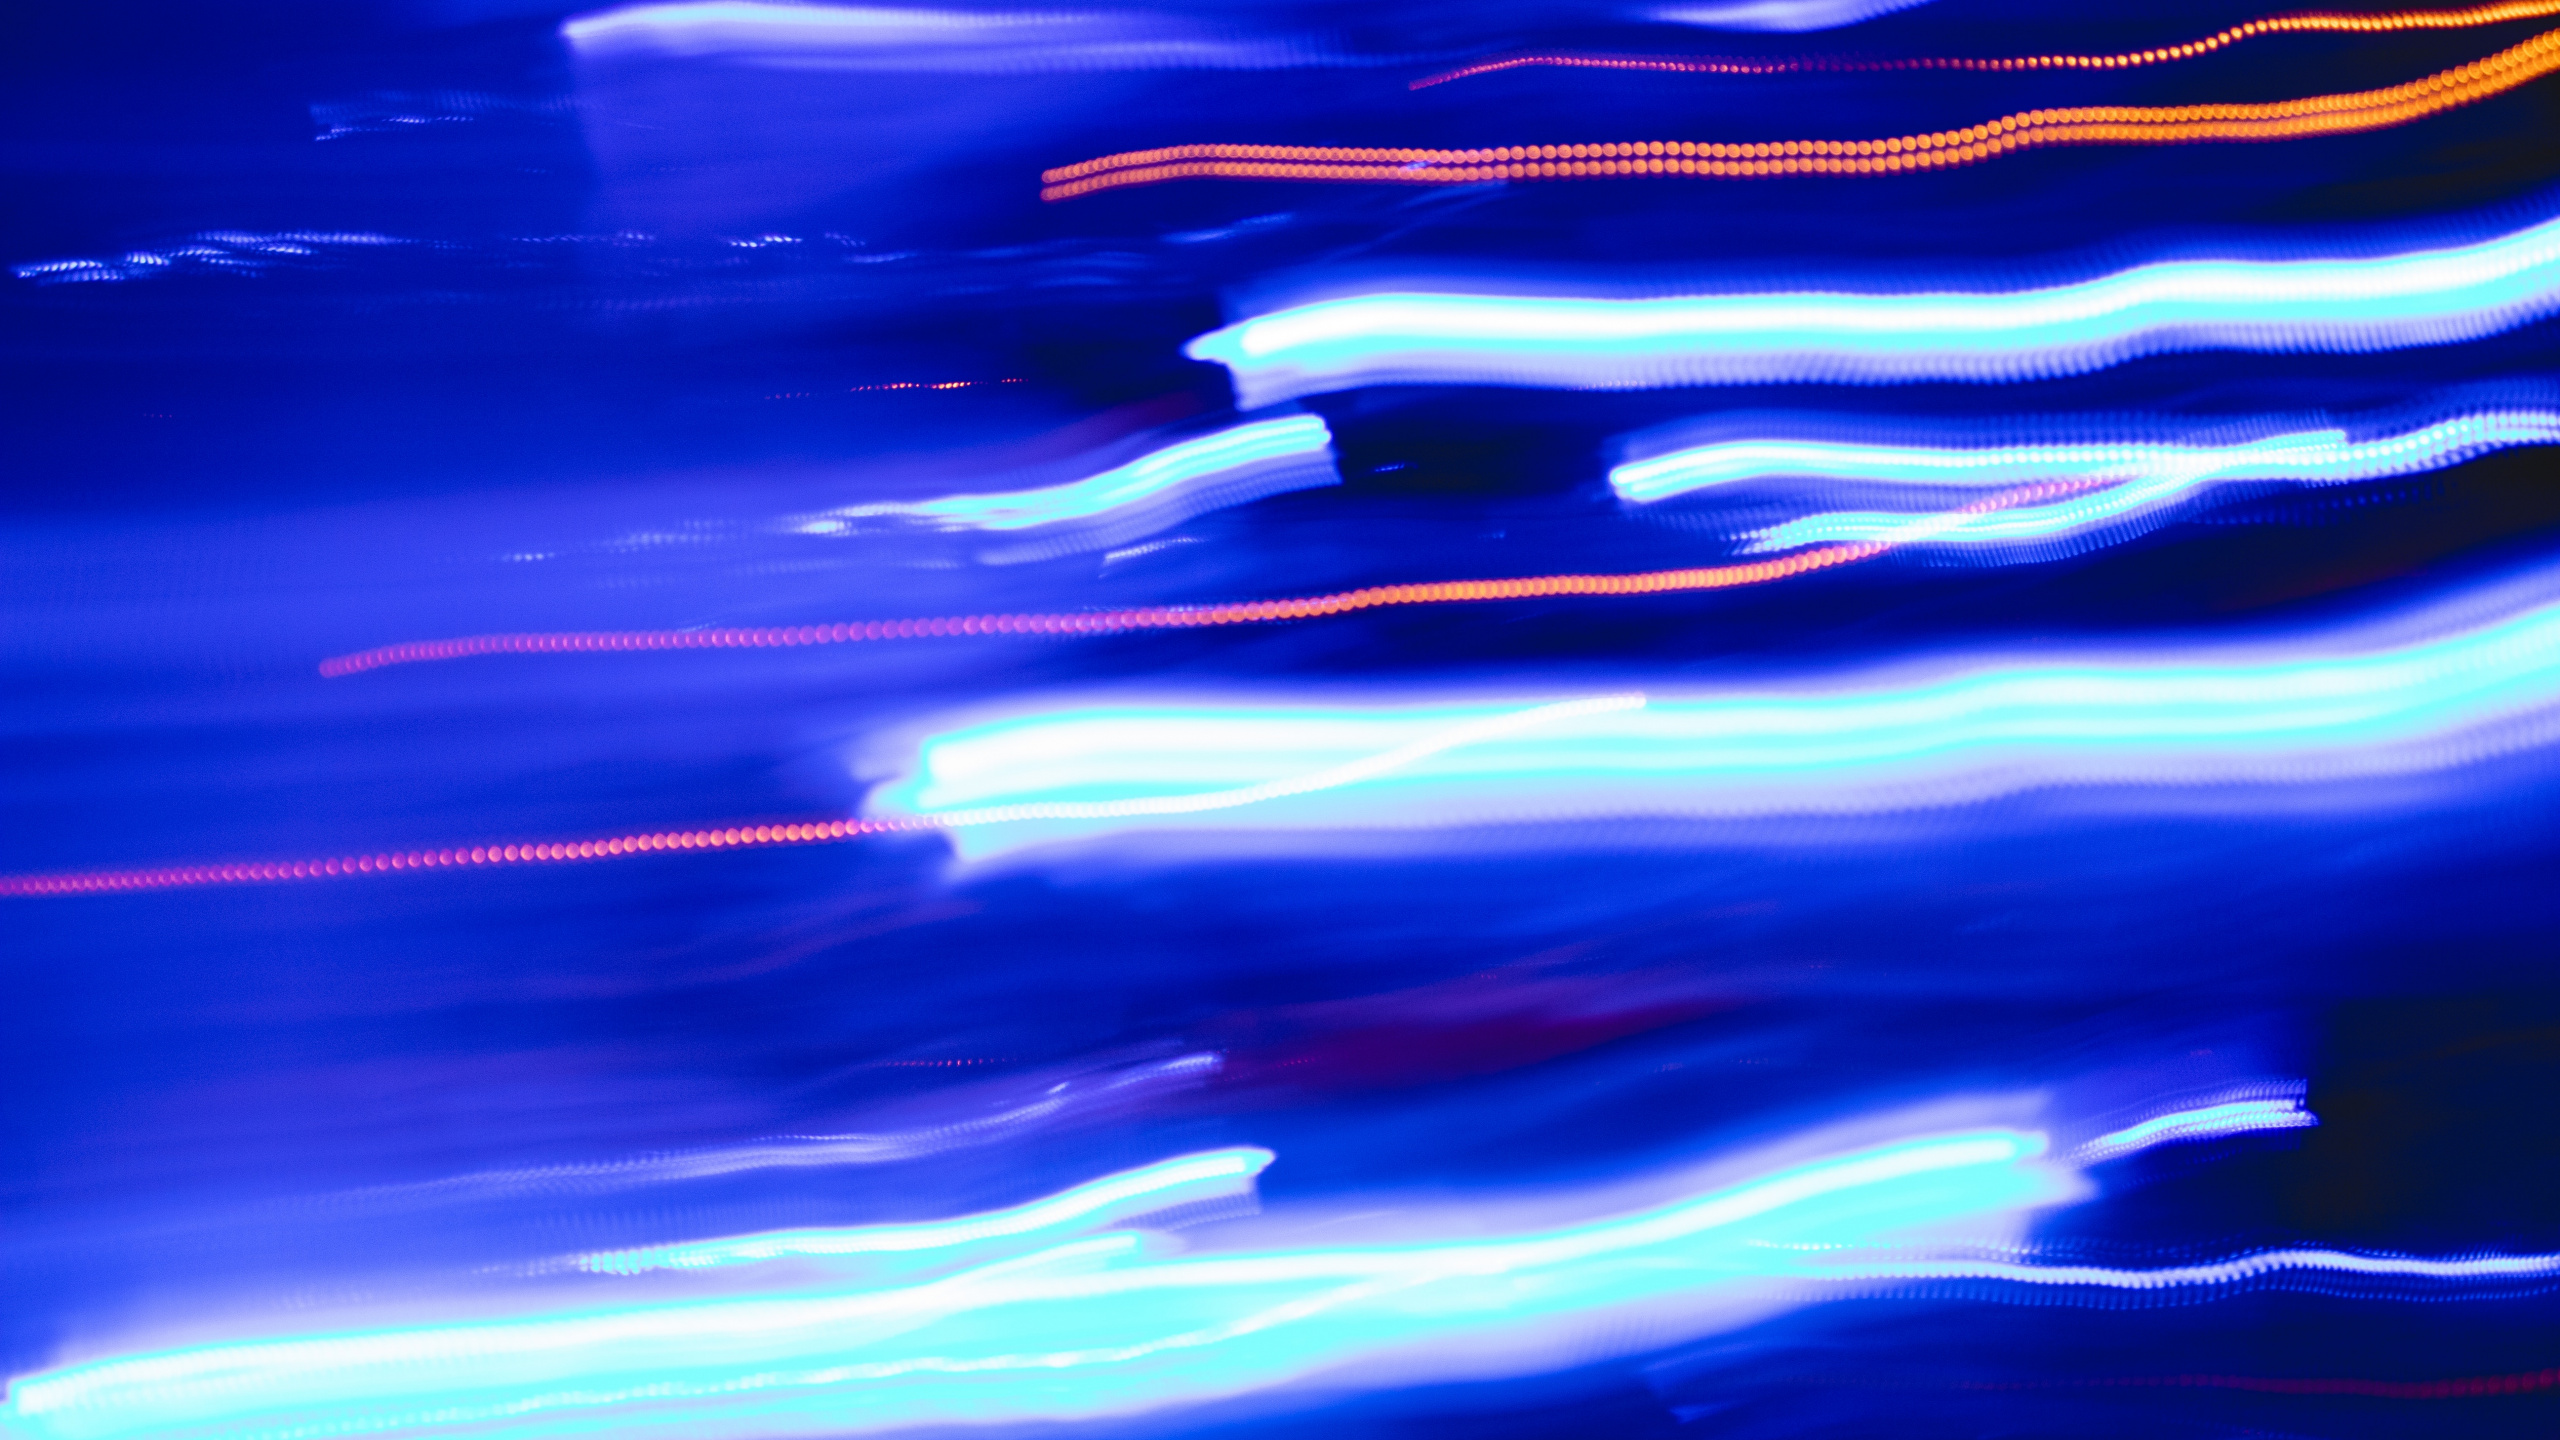 Blue and White Abstract Painting. Wallpaper in 2560x1440 Resolution